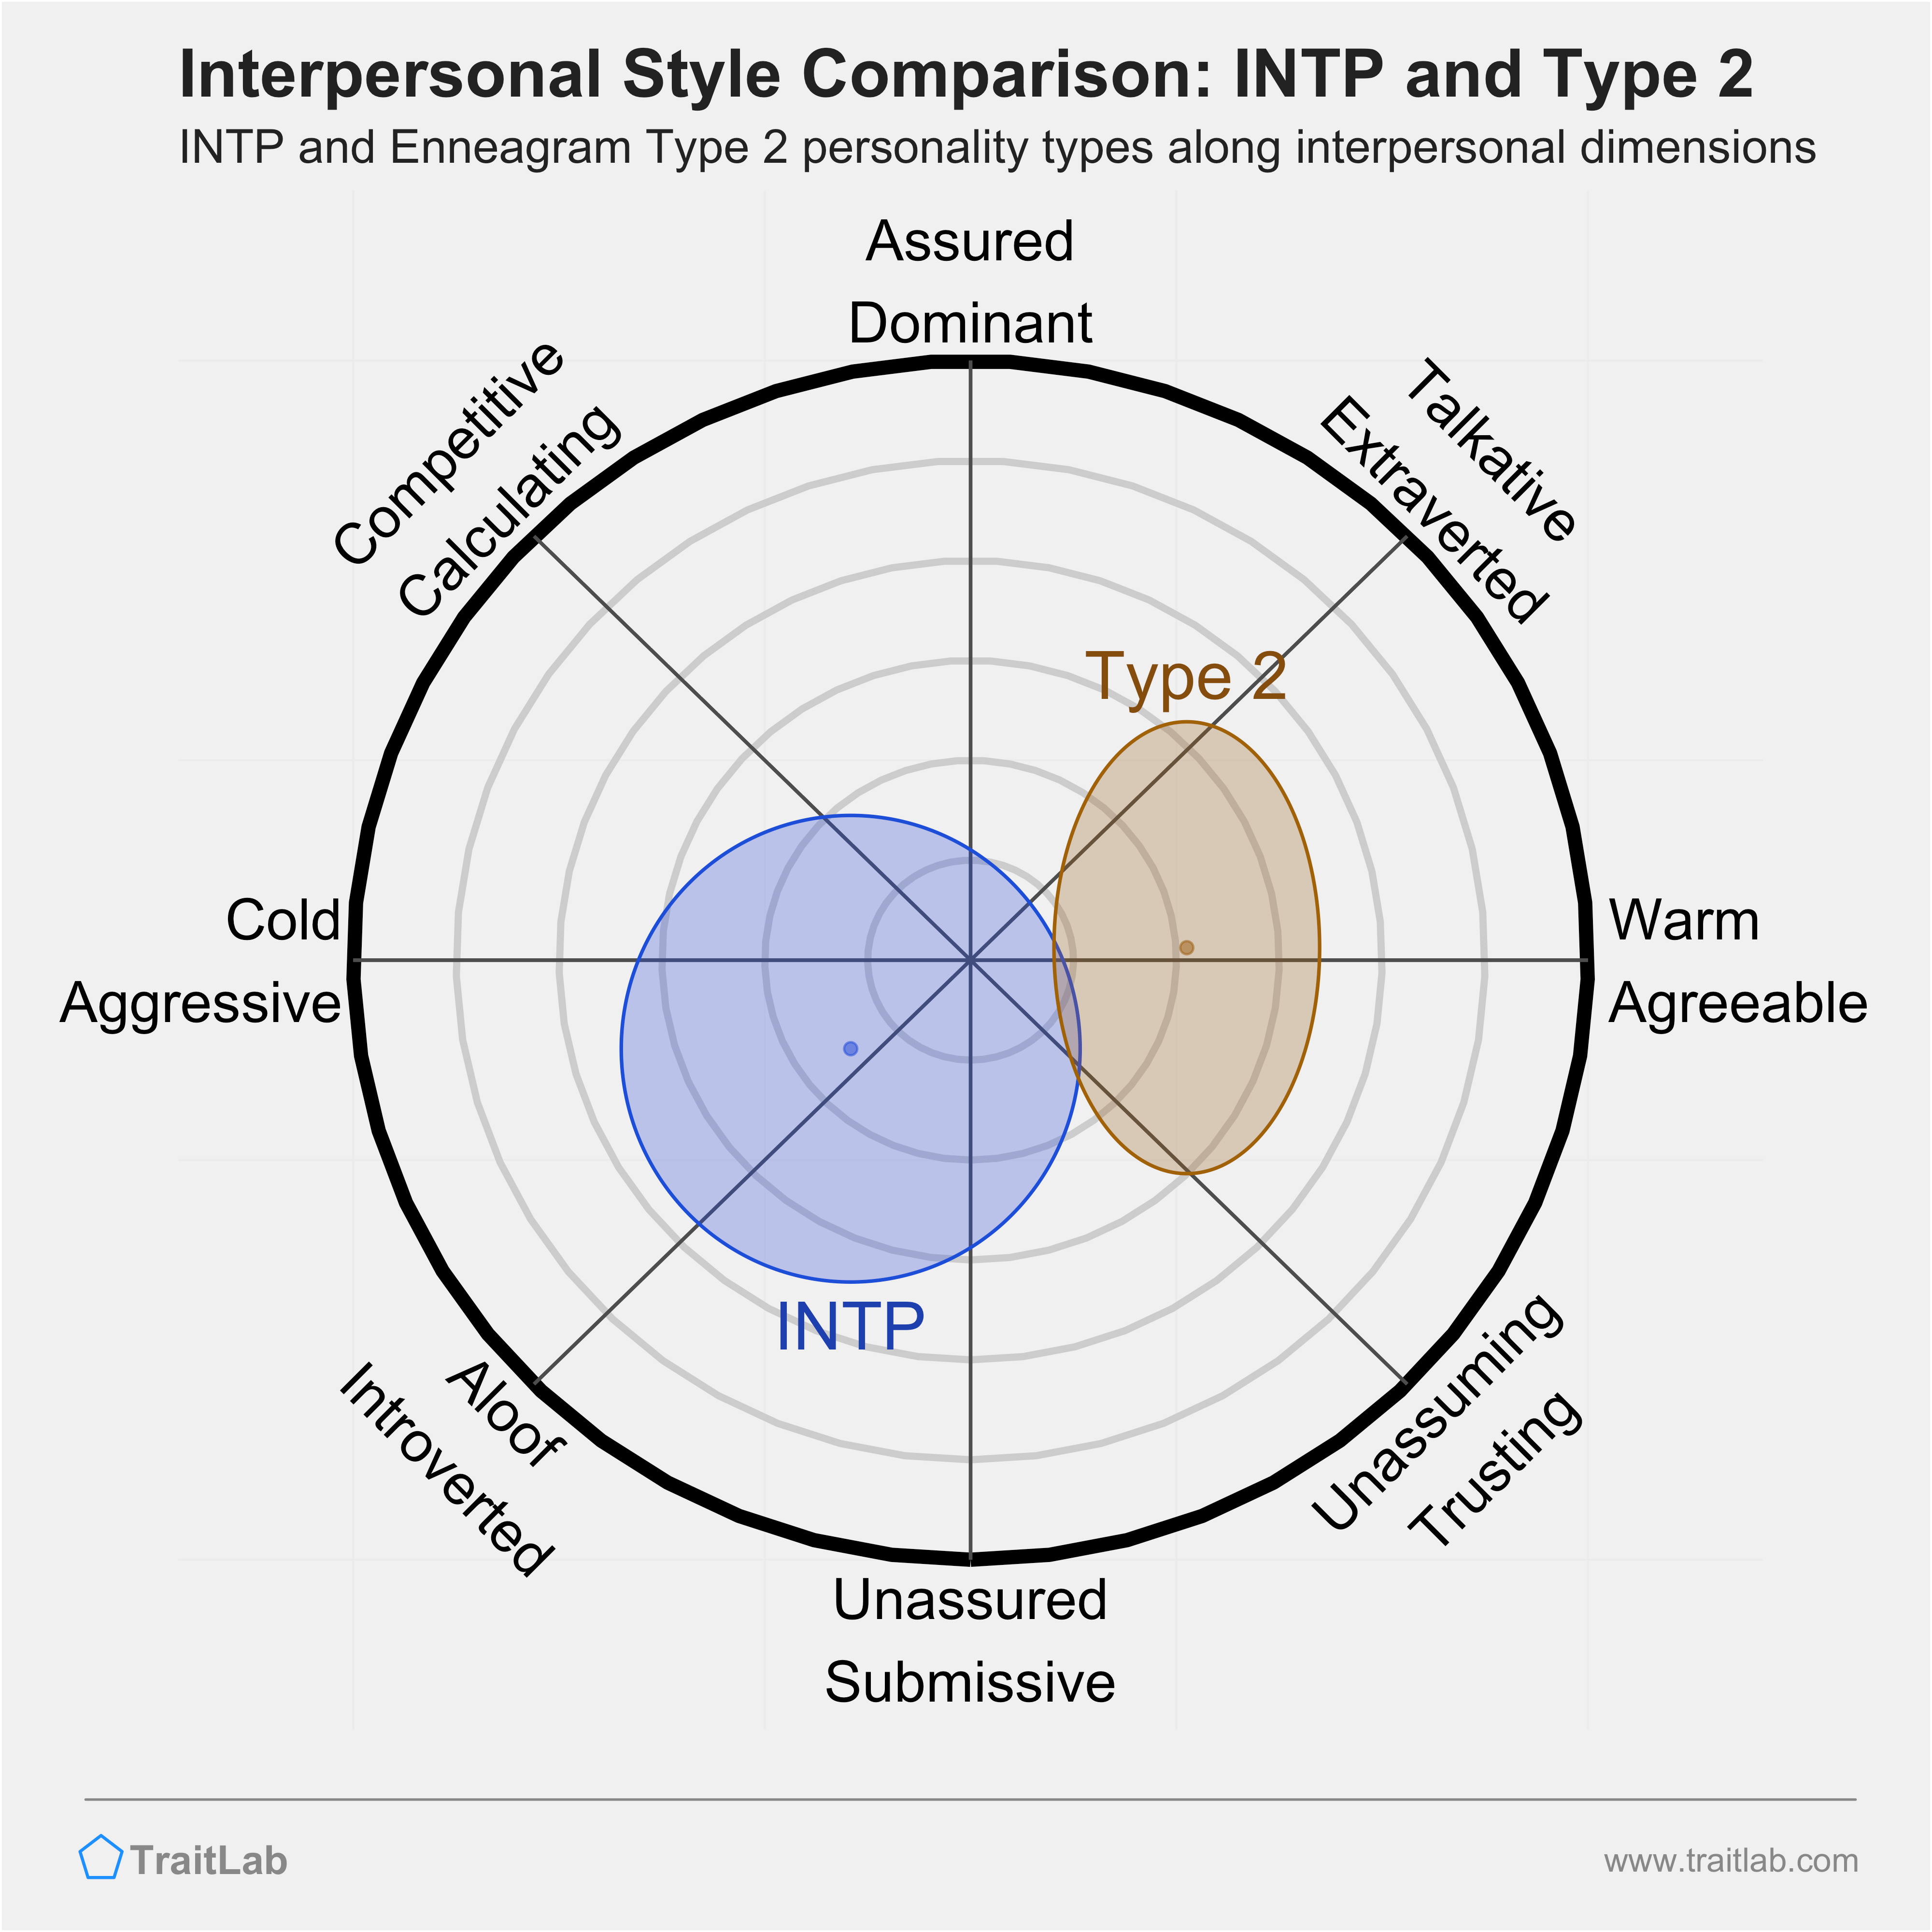 Enneagram INTP and Type 2 comparison across interpersonal dimensions